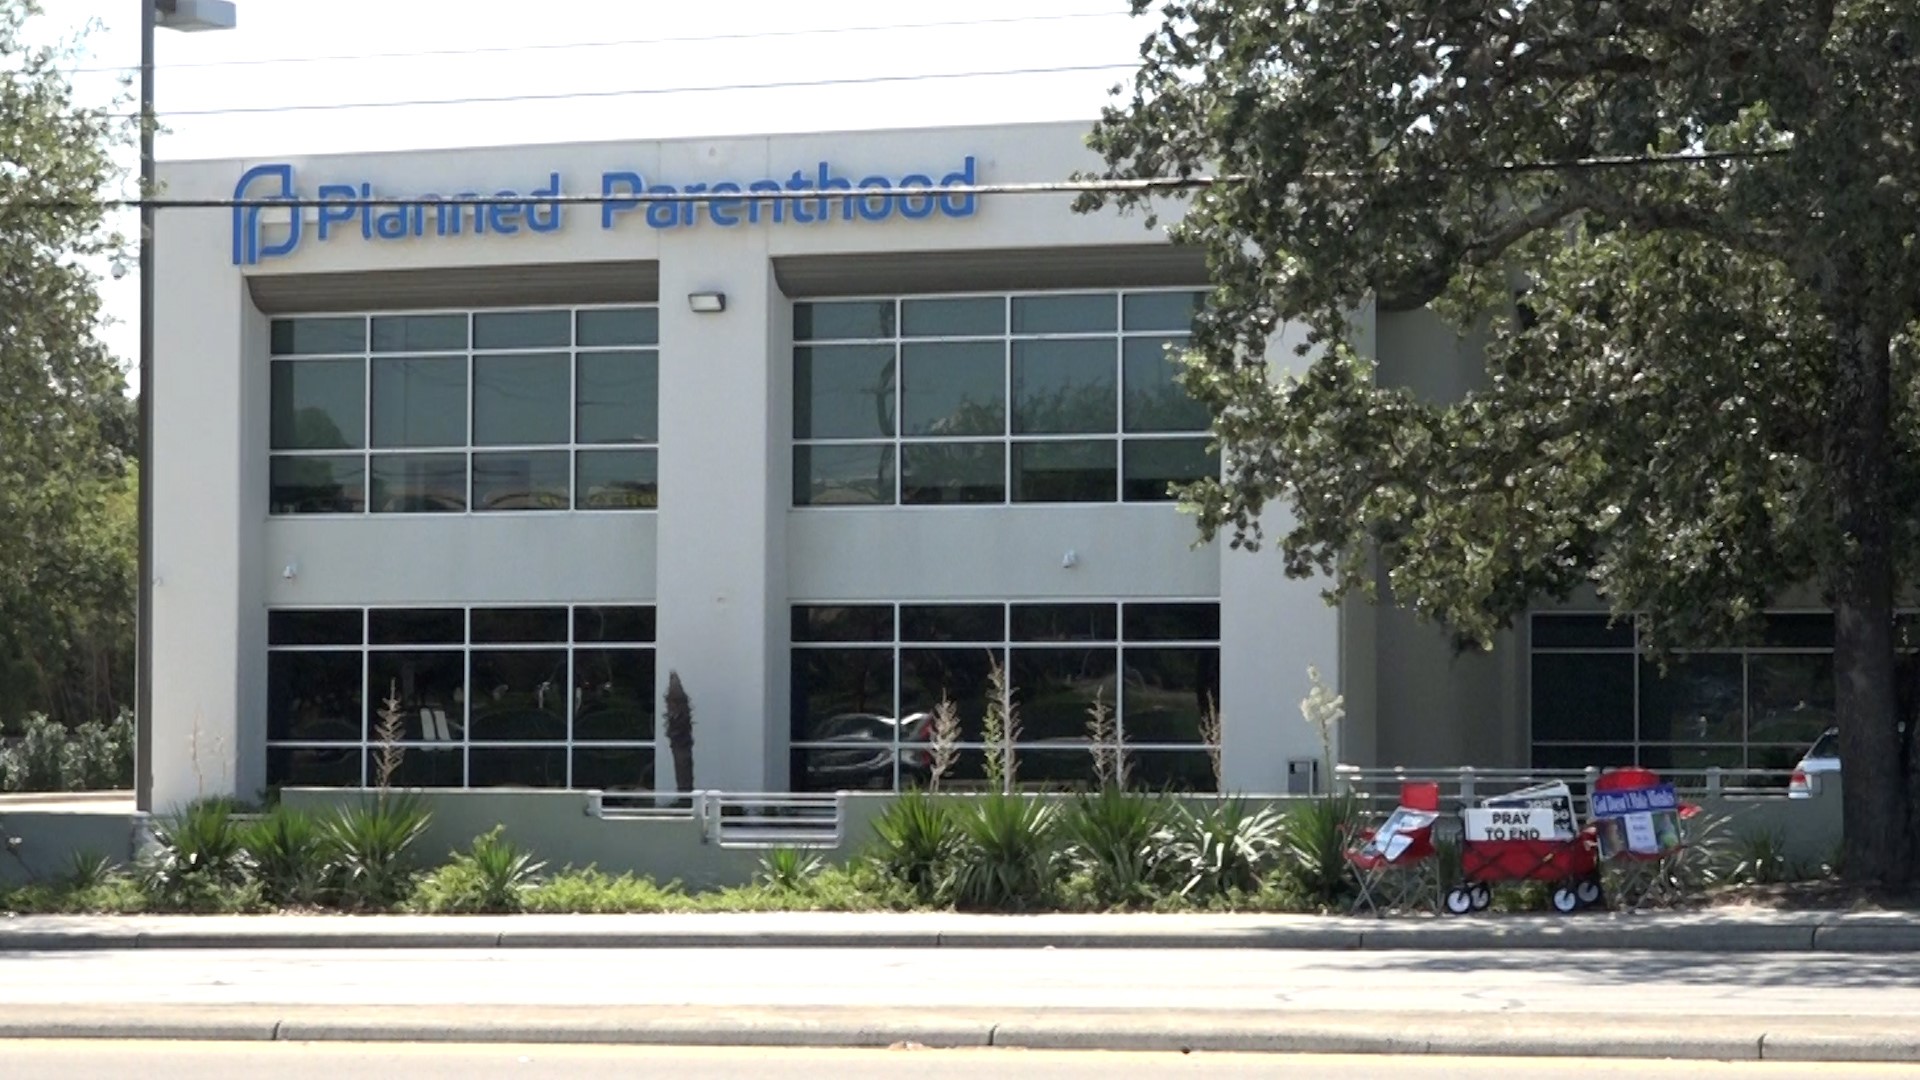 Planned Parenthood South Texas says morning after pills will be available at their area clinics through November 30.